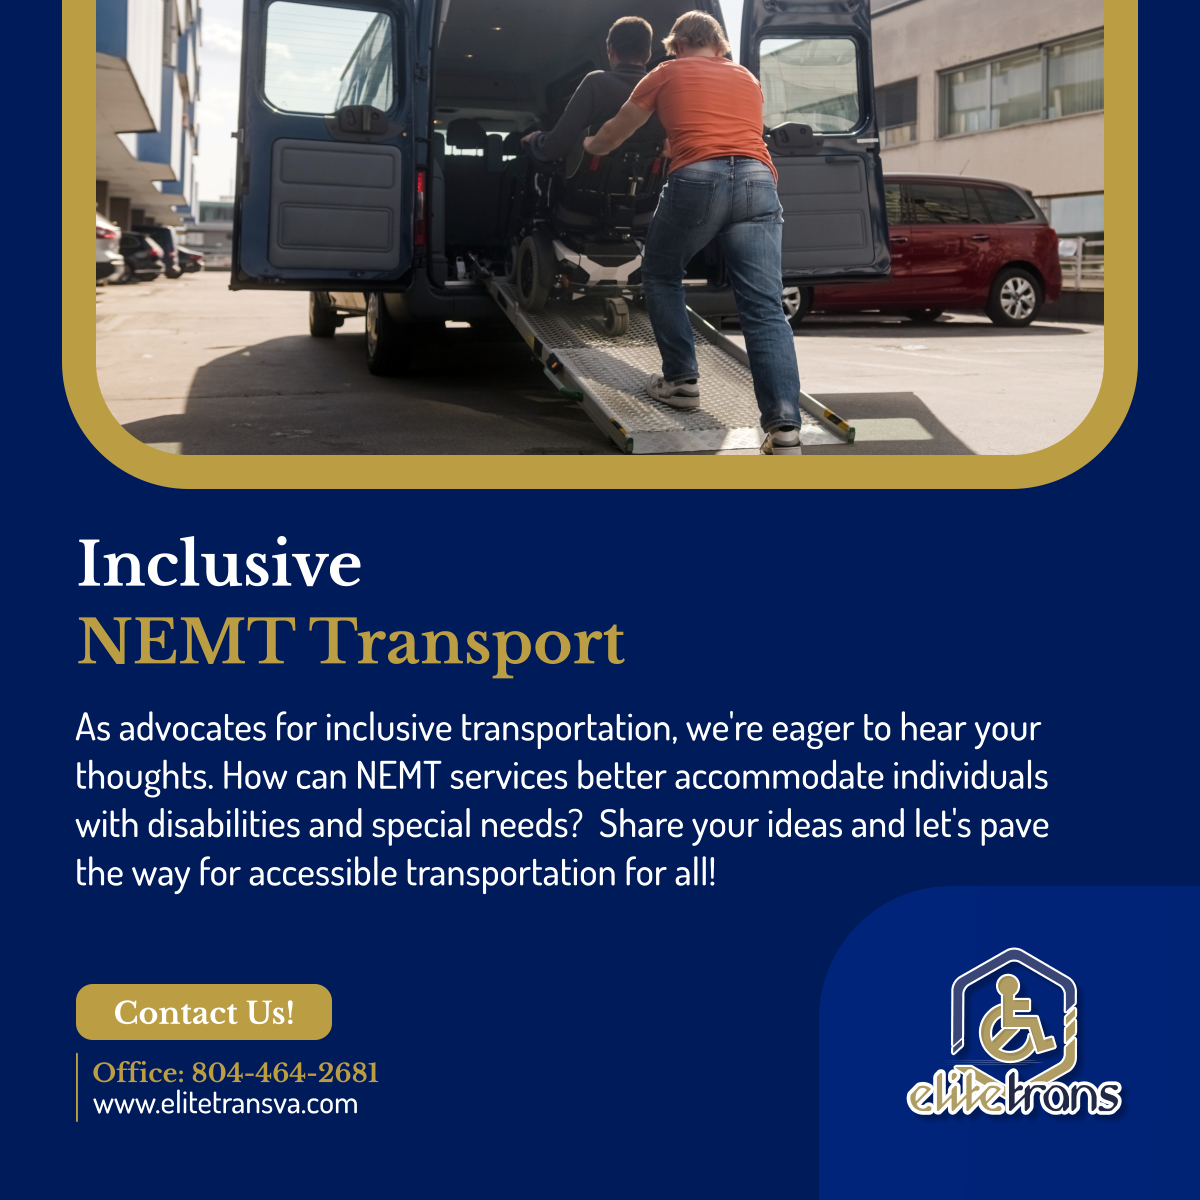 Join the conversation! We're committed to enhancing accessibility in NEMT services. Your input drives our mission for inclusive transportation. Share your insights now! 

#NEMTServices #MidlothianVA #InclusiveTransportation #InclusiveCommunities #AccessibilityMatters